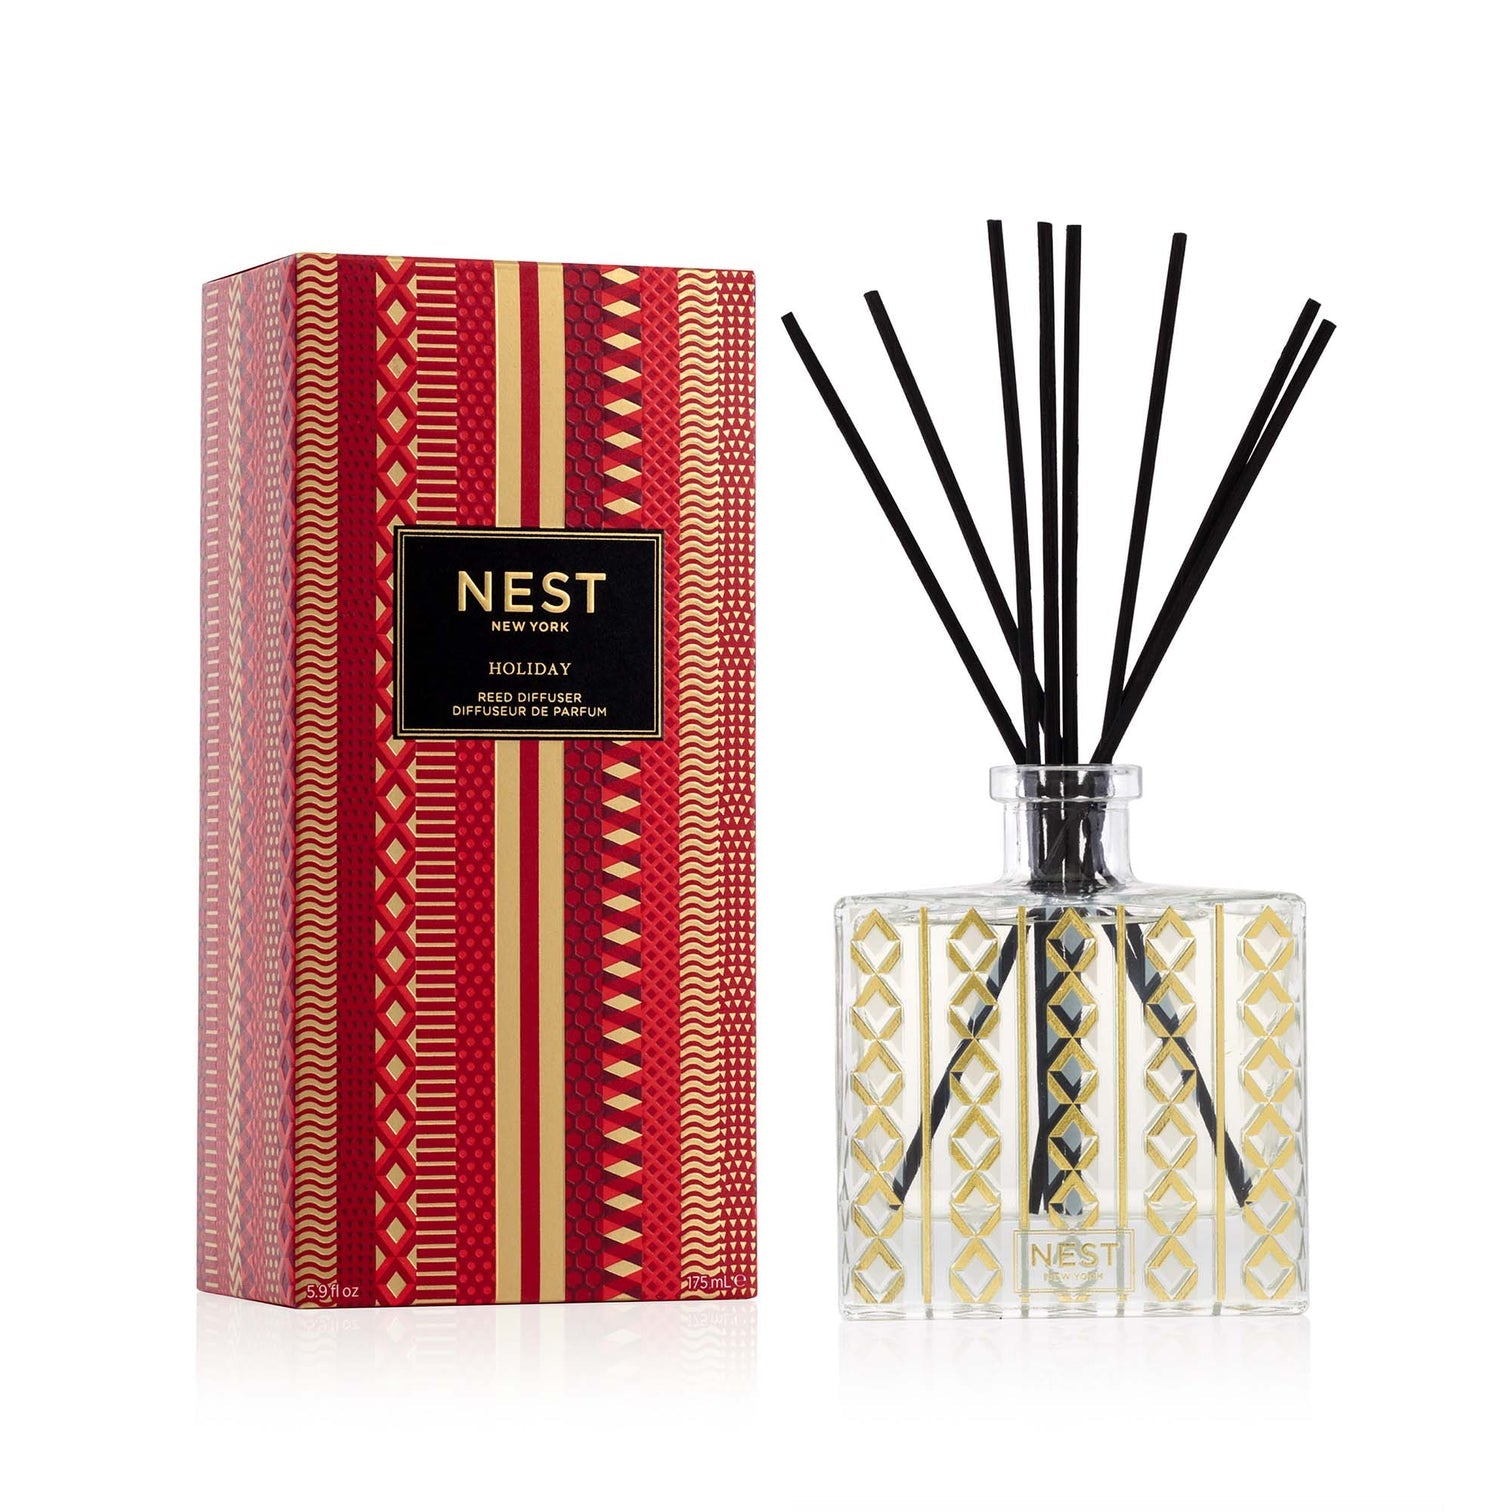 Nest Festive Reed Diffuser